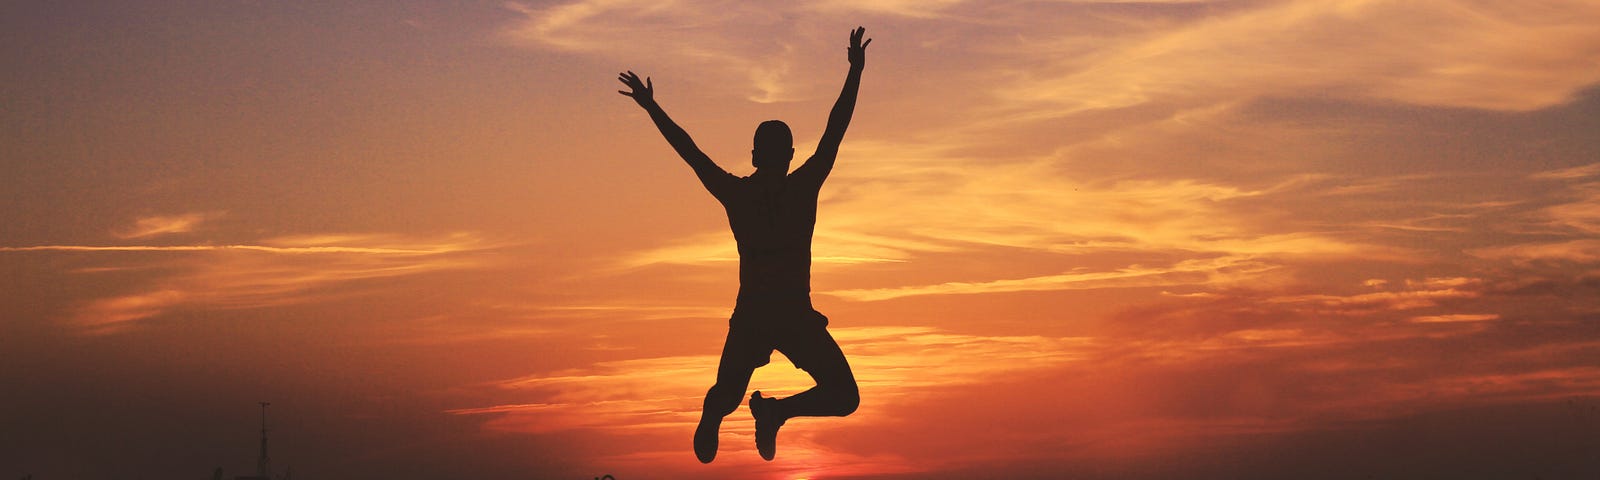 Man jumping as result of following the most direct path to happiness